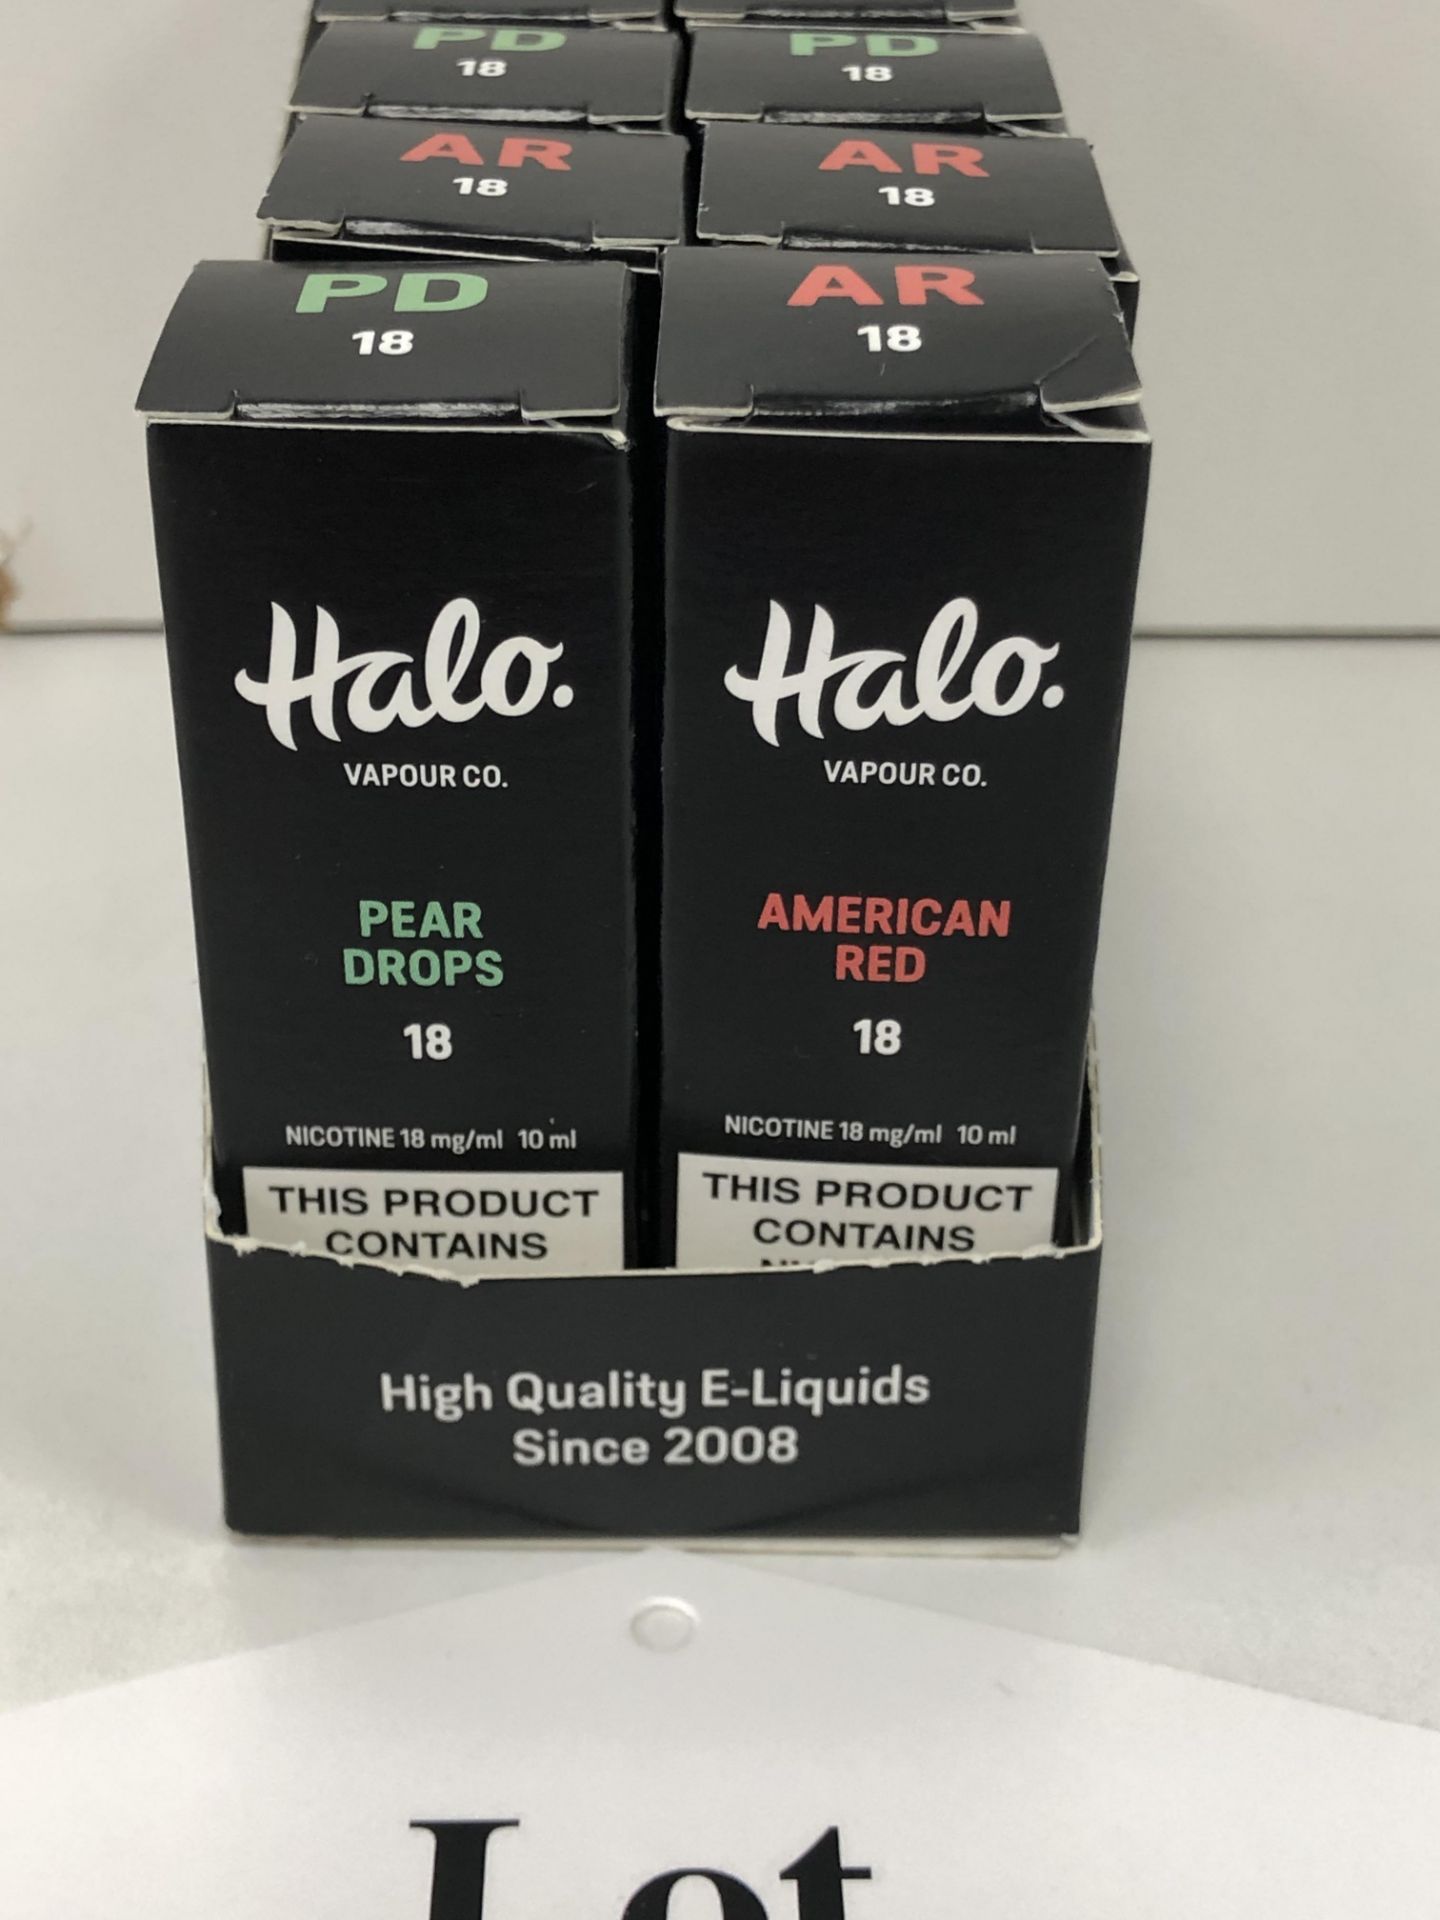 10 x Vapour co Pear drops American red Halo 18 Mg/Ml BNIB- 10 ml |96154519 96129500 - Image 7 of 7